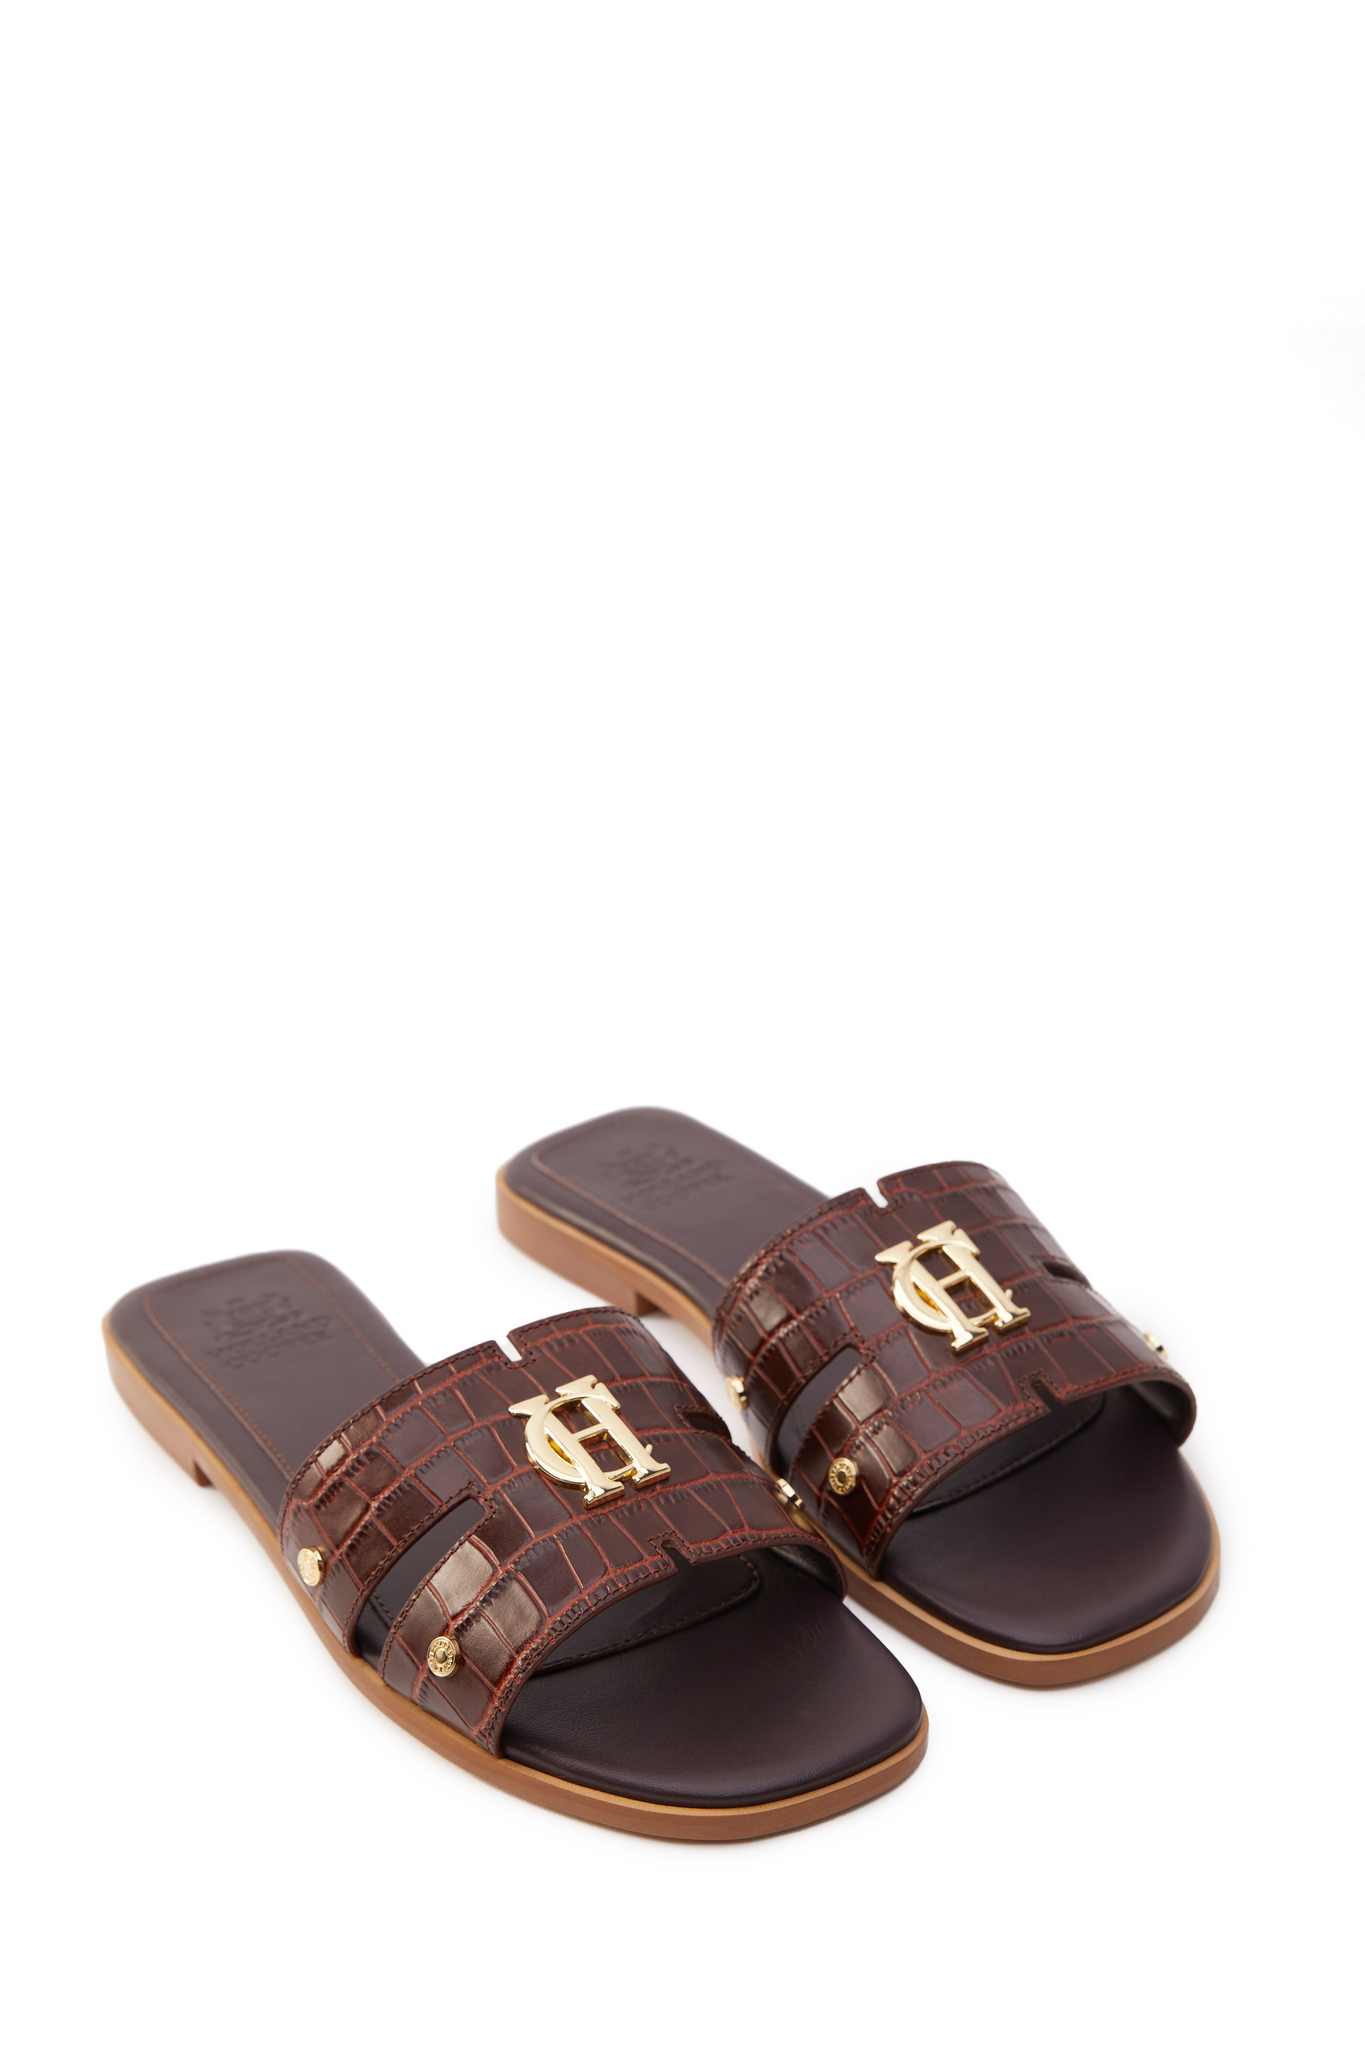 Brown croc embossed leather sliders with a tan leather sole and gold hardware